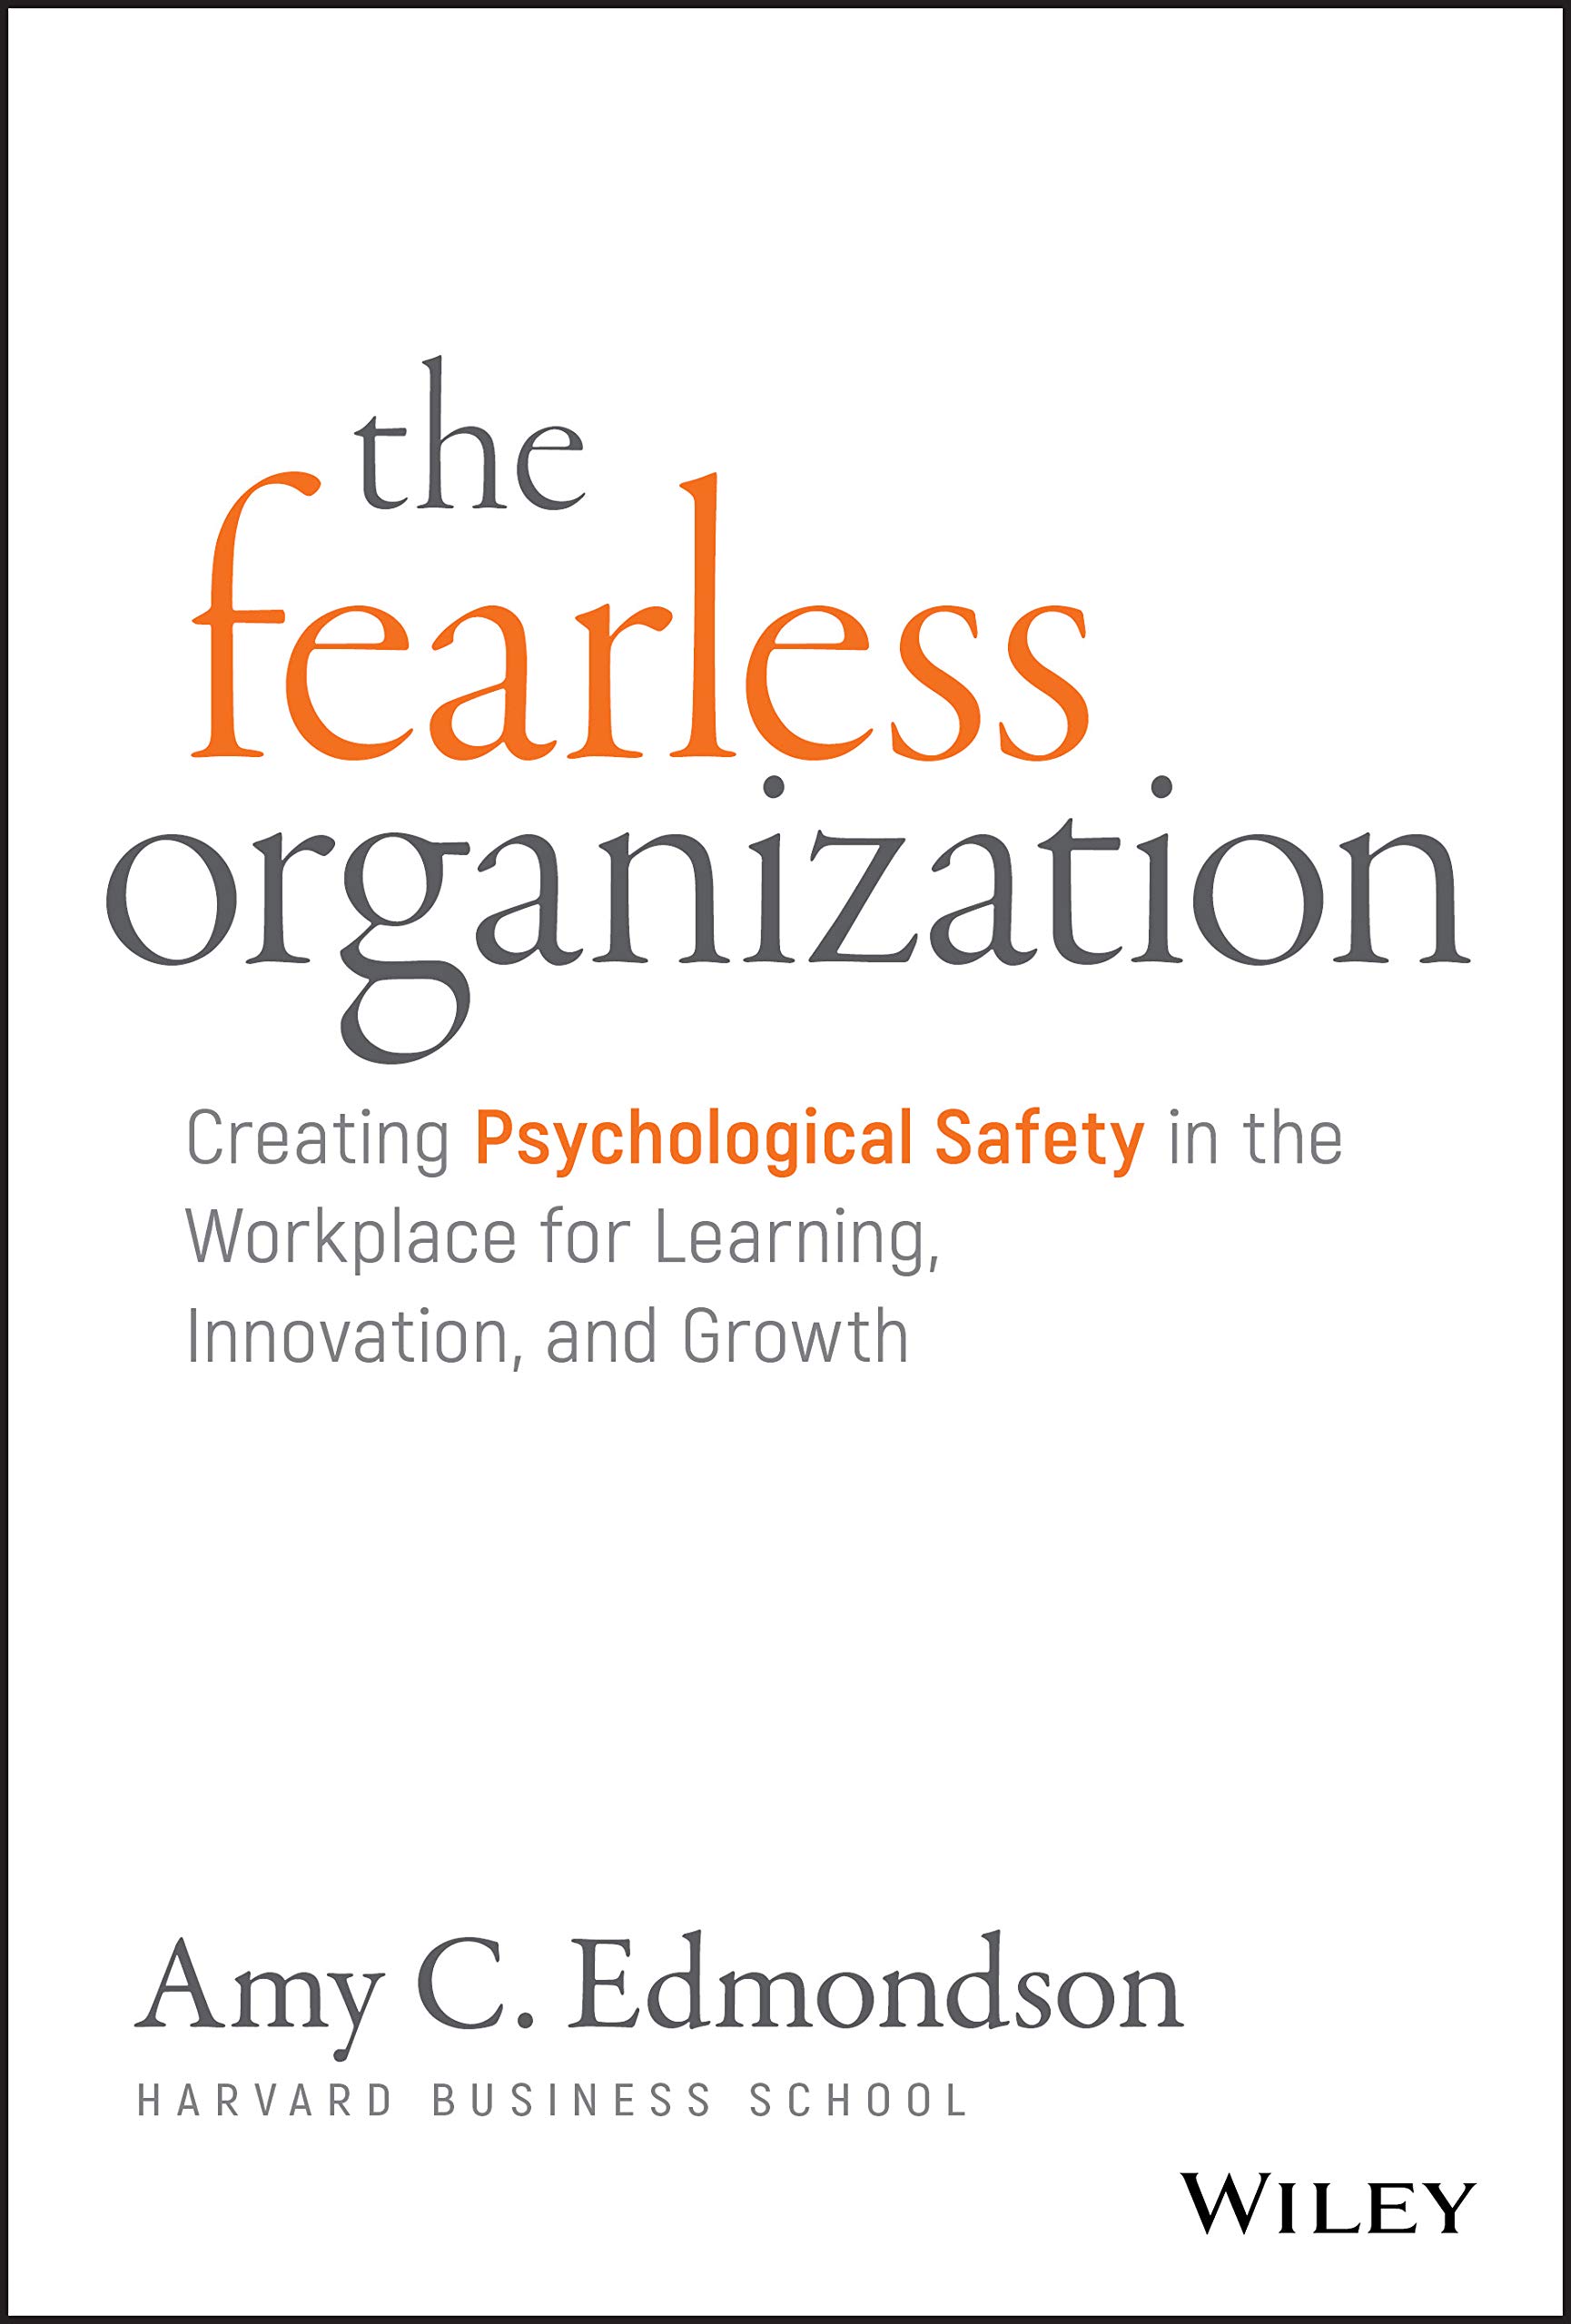 "The Fearless Organisation" by Amy Edmondson